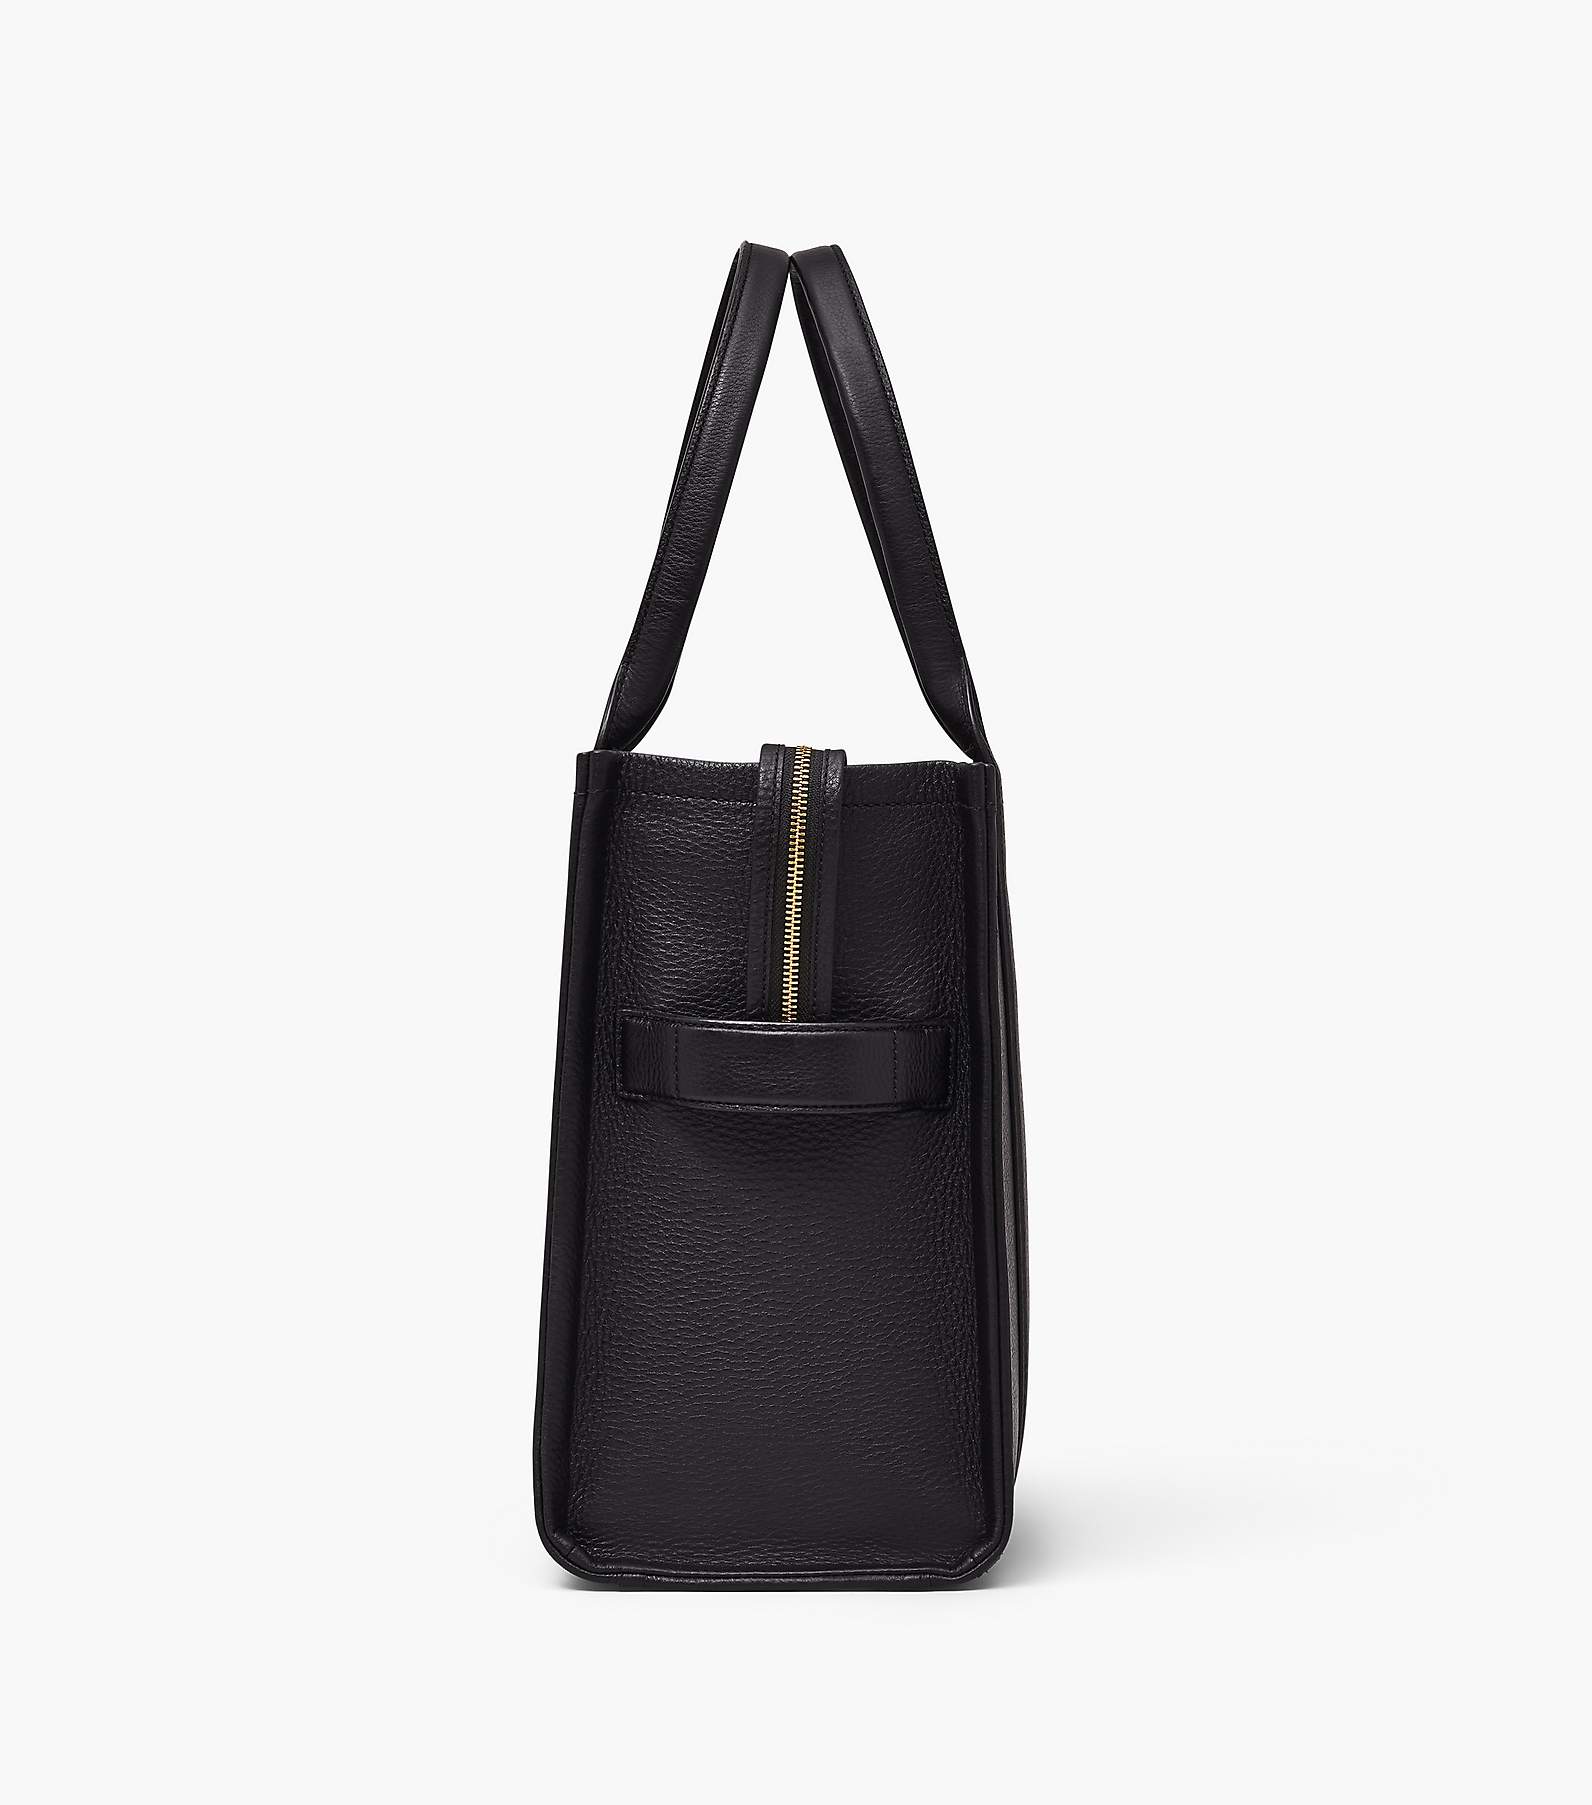 Tote Bags for Women